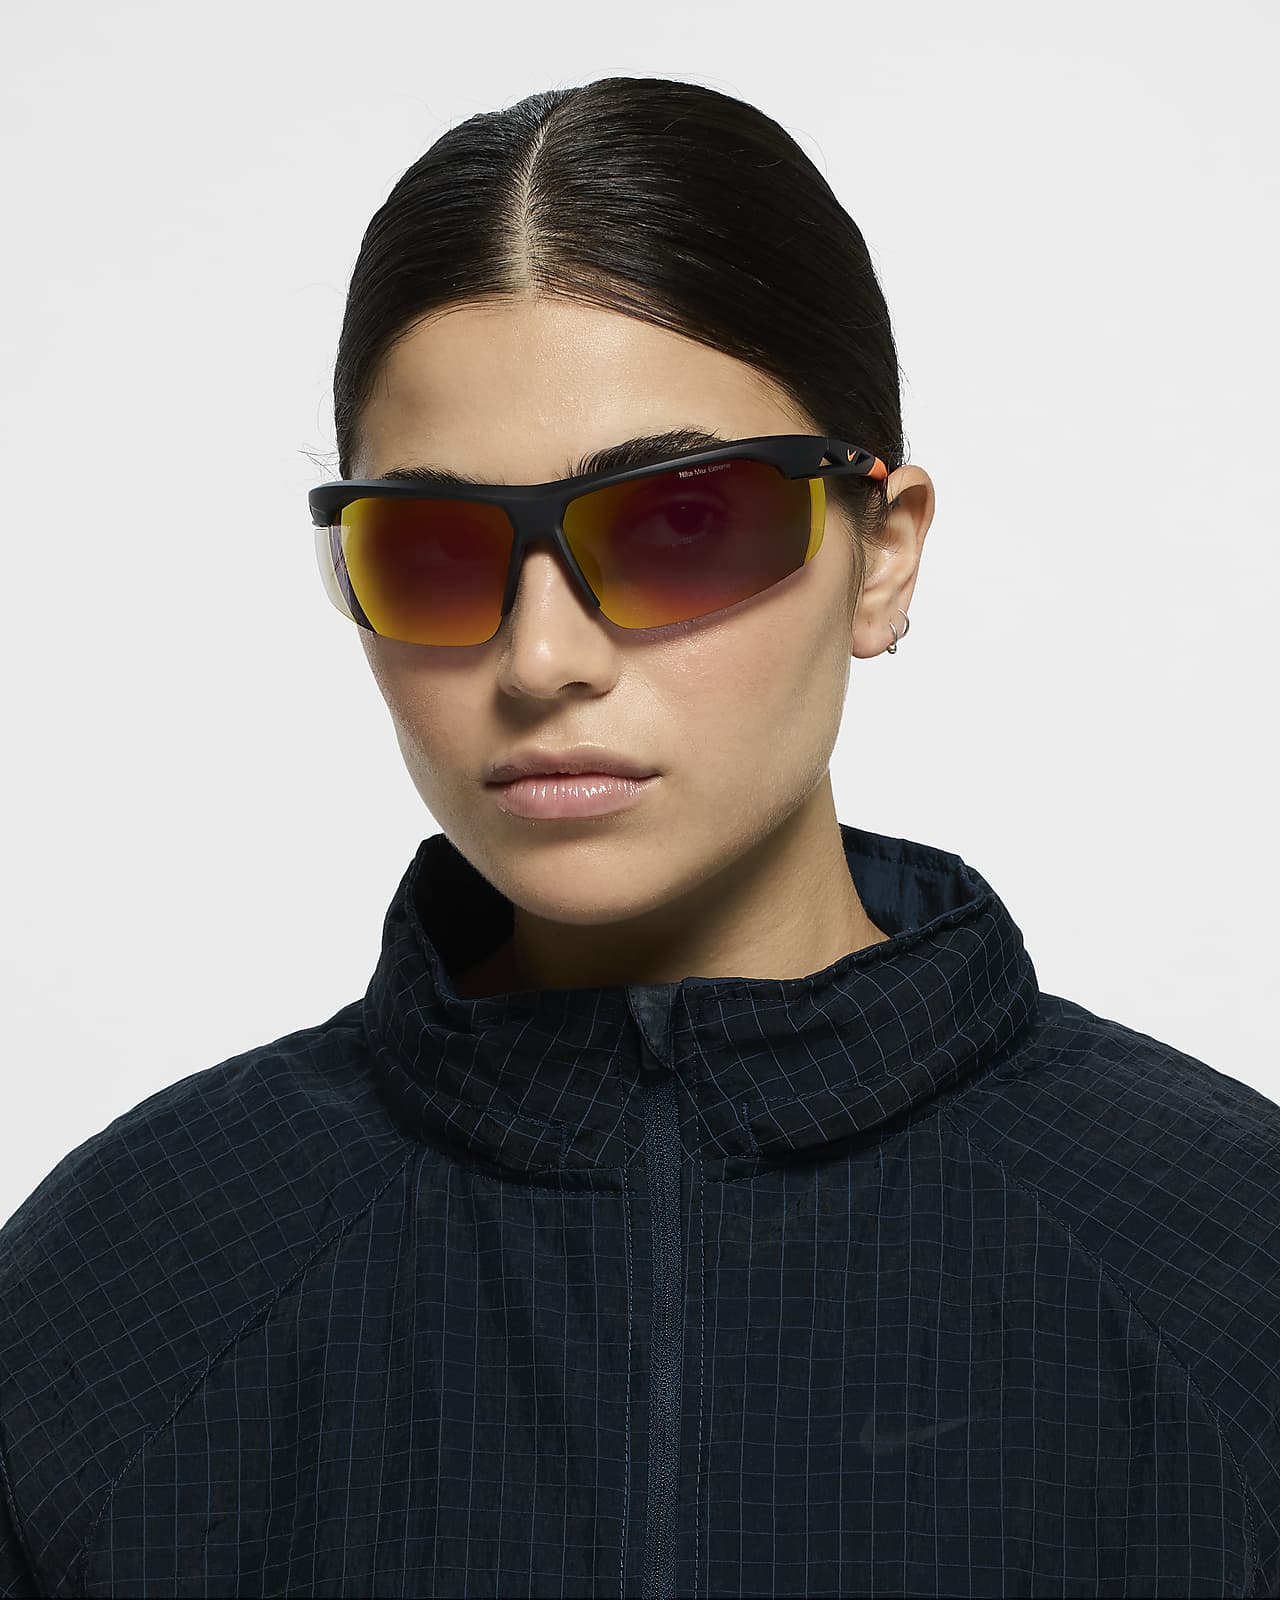 Nike Windtrack Sonnenbrille mit Road Tint